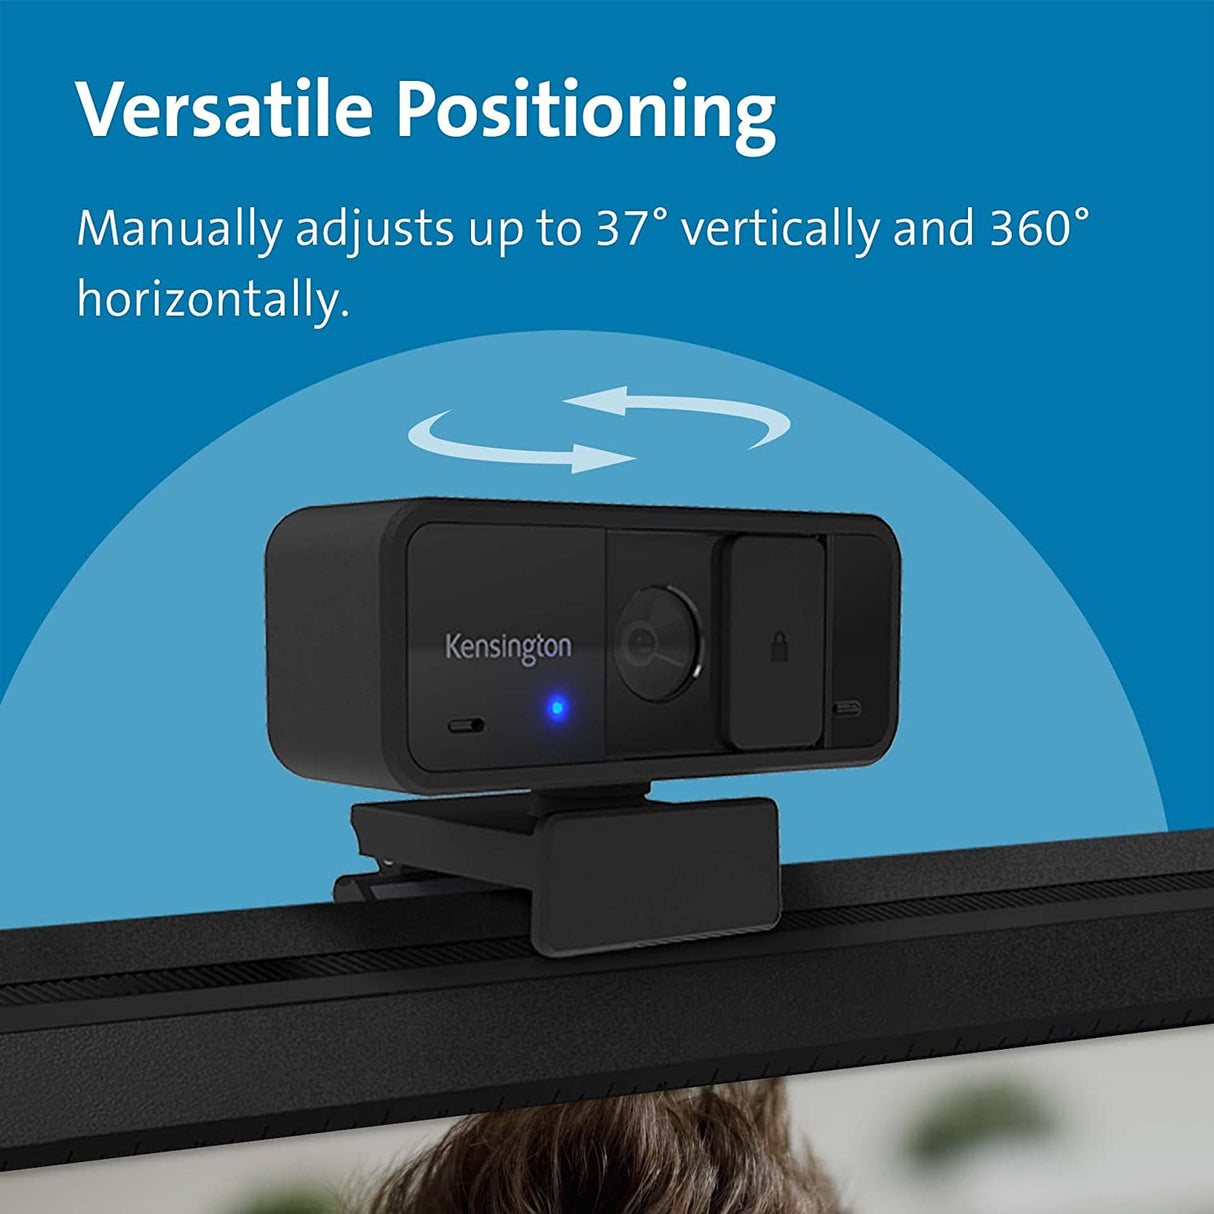 Kensington W1050 1080p Fixed Focus Wide Angle Webcam for Video Conference, Dual Stereo Mic, Software Control, Privacy Cover, Works with Microsoft Teams, Google Meet, Zoom and More (K80250WW)